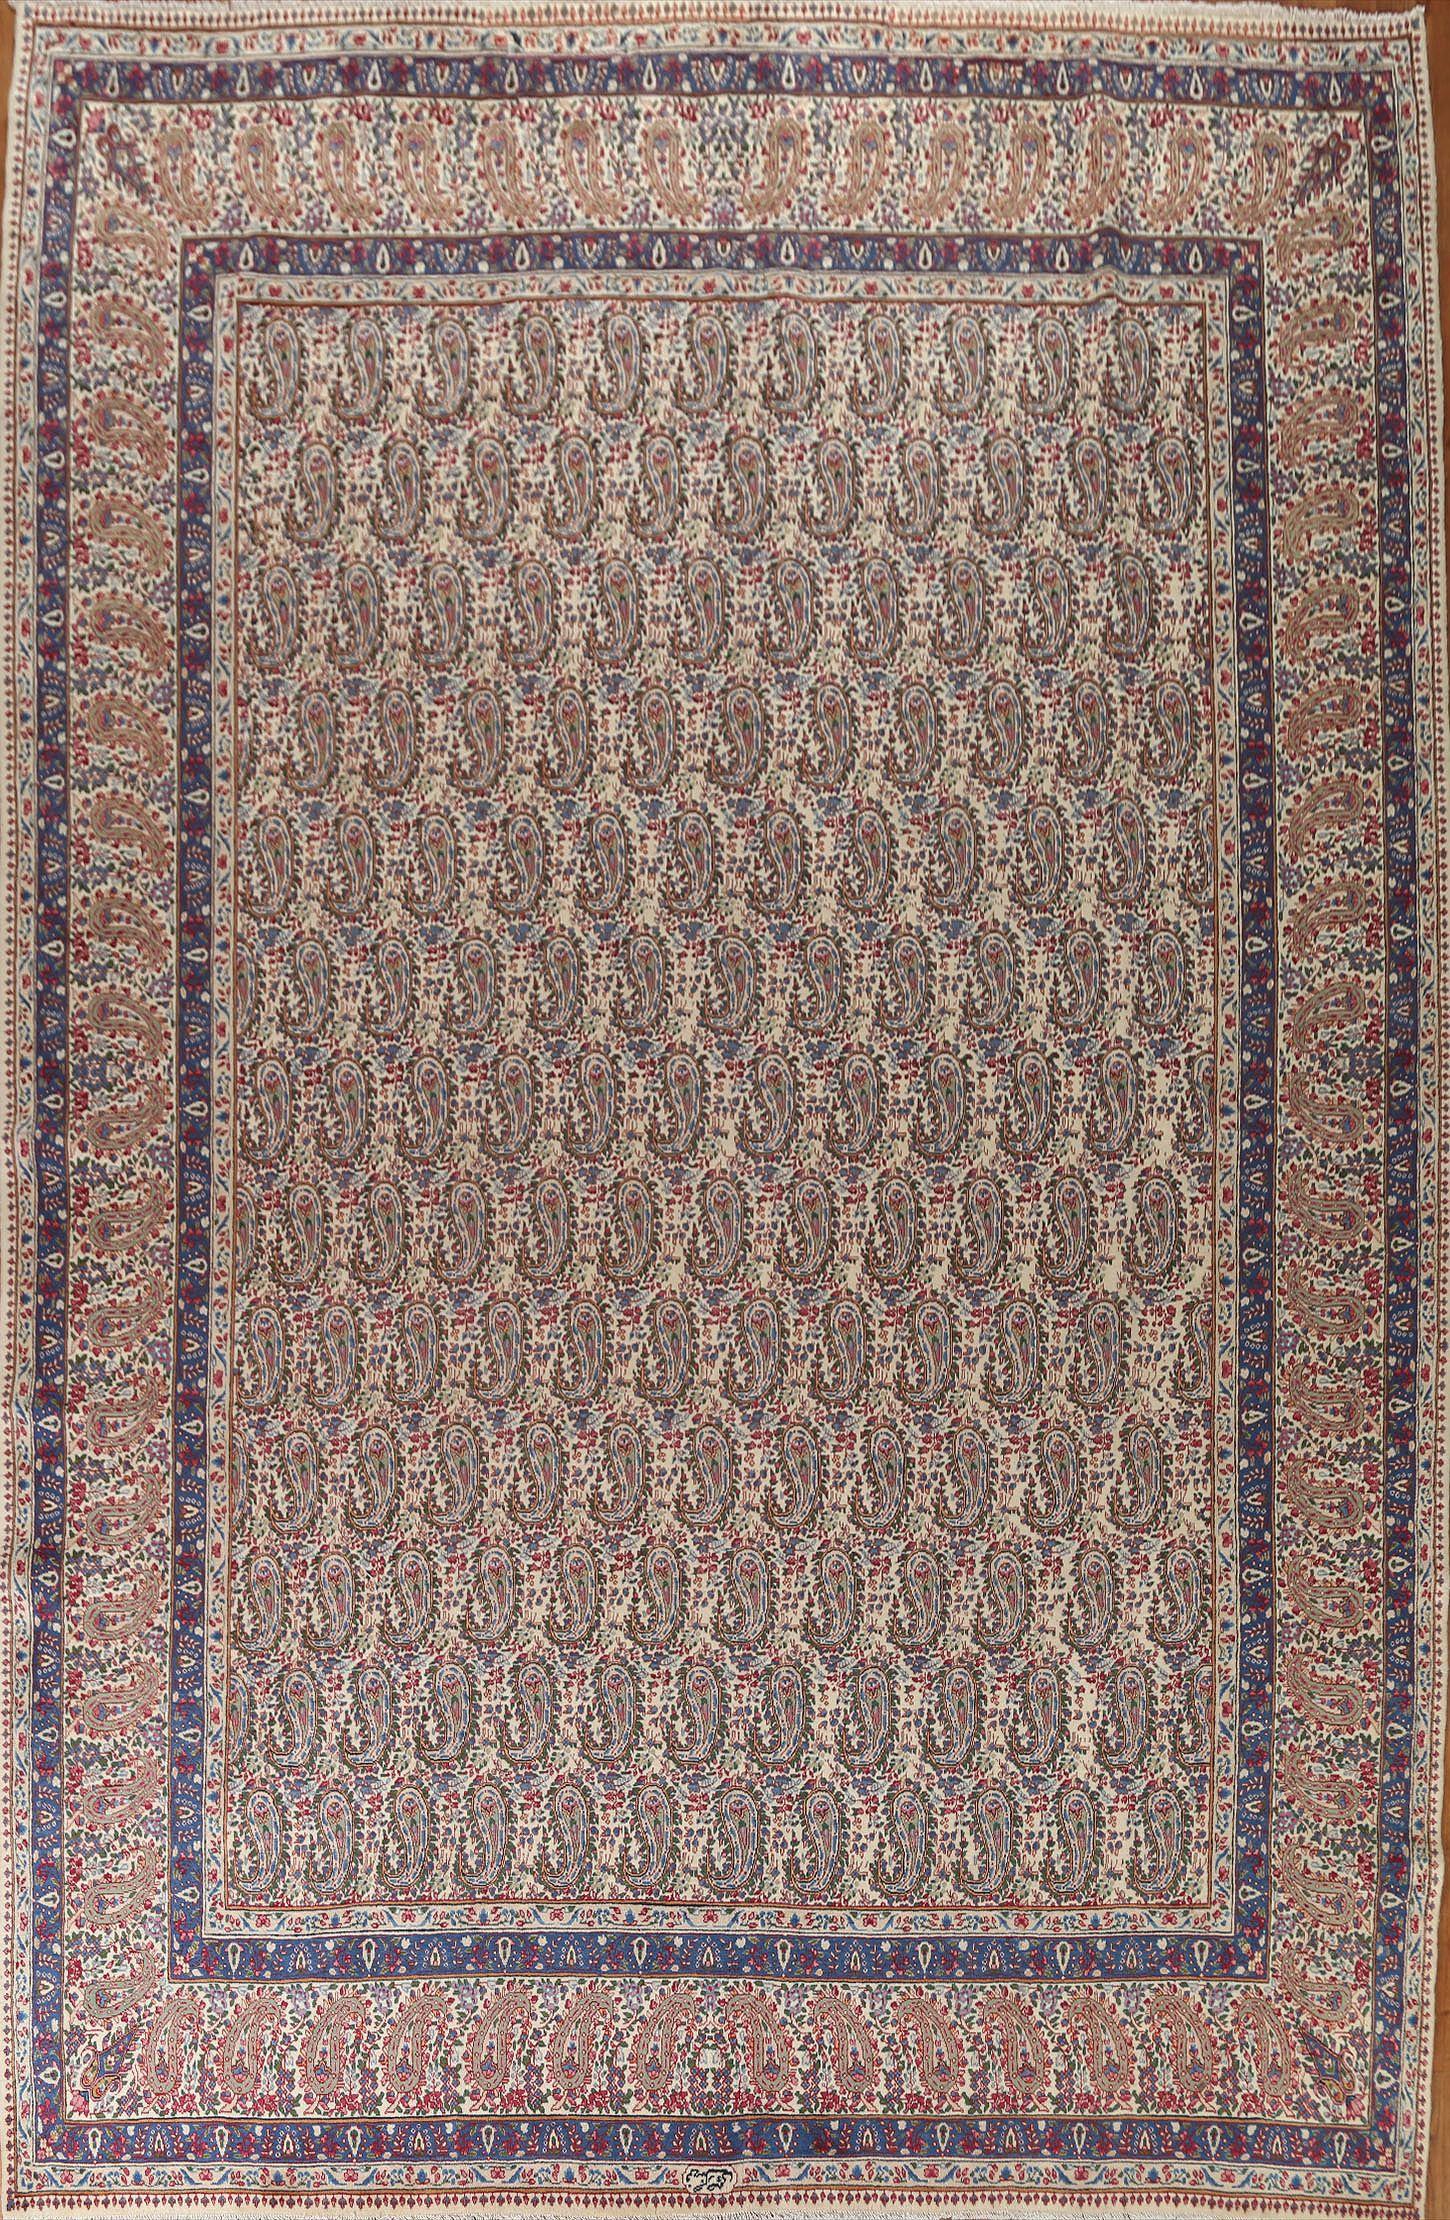 Area Oversized All-Over Paisley Mood Persian Area Rug 10x13